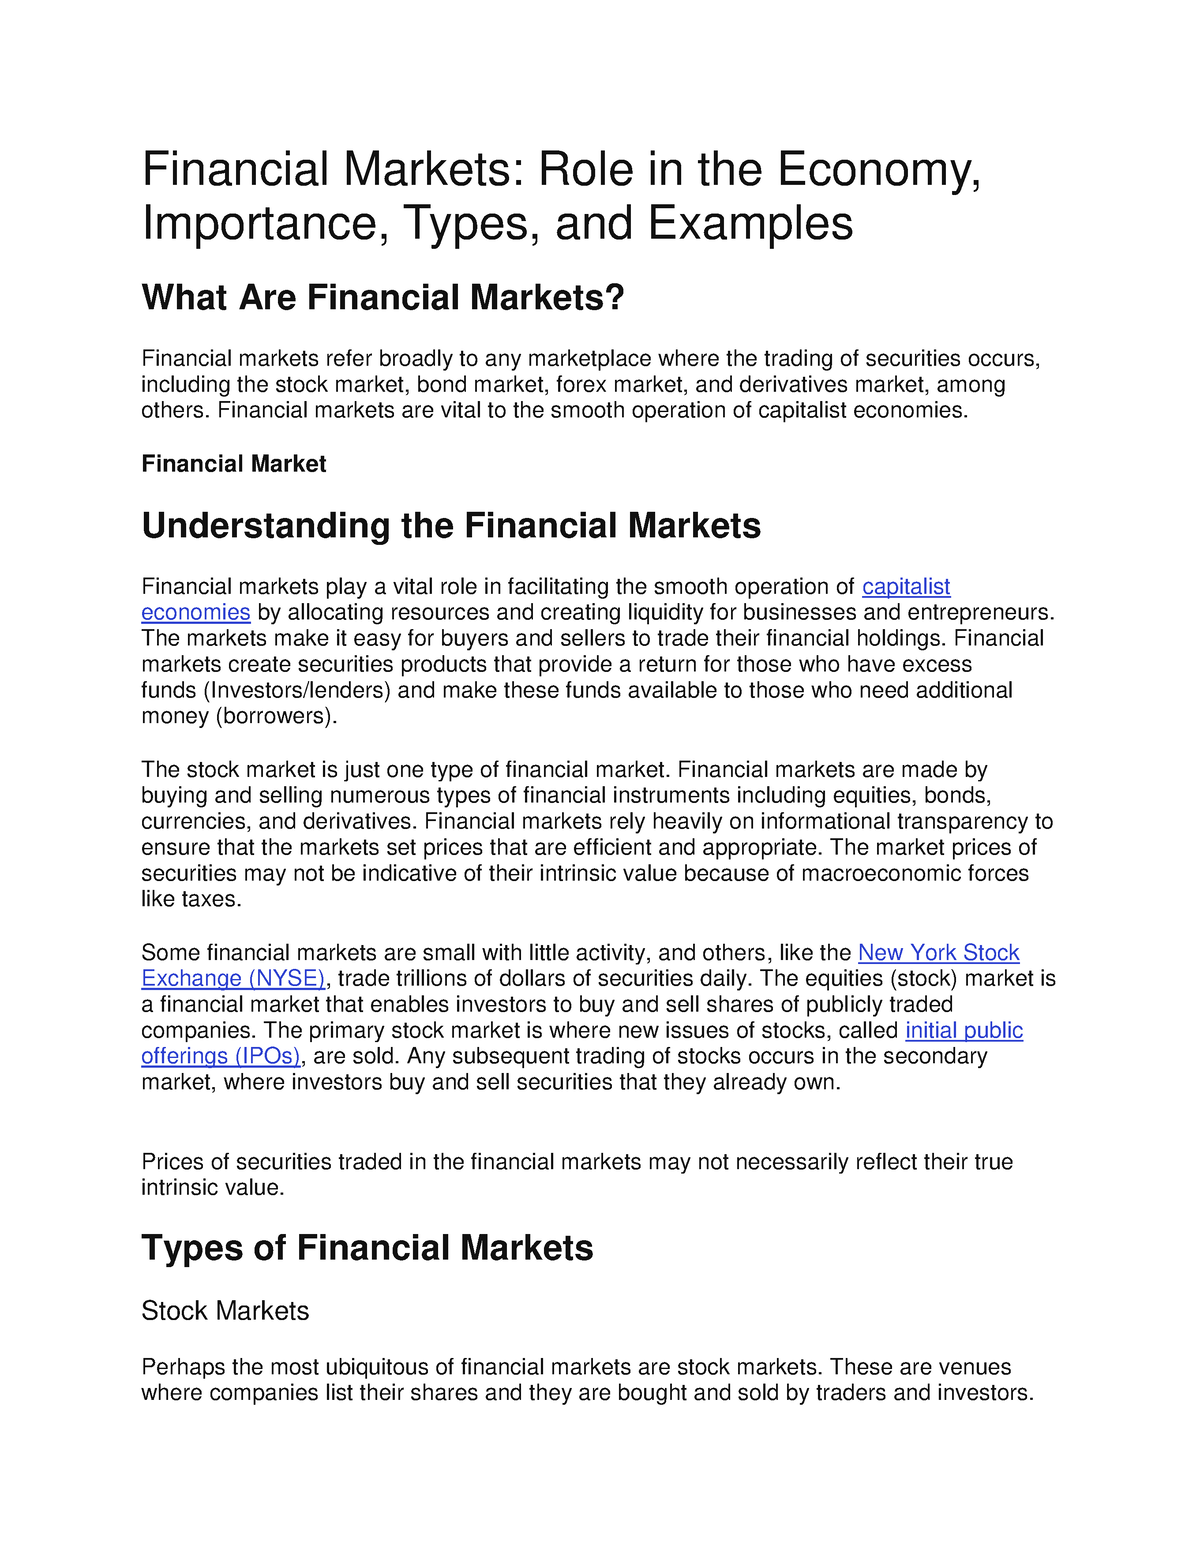 Financial Markets: Role in the Economy, Importance, Types, and Examples